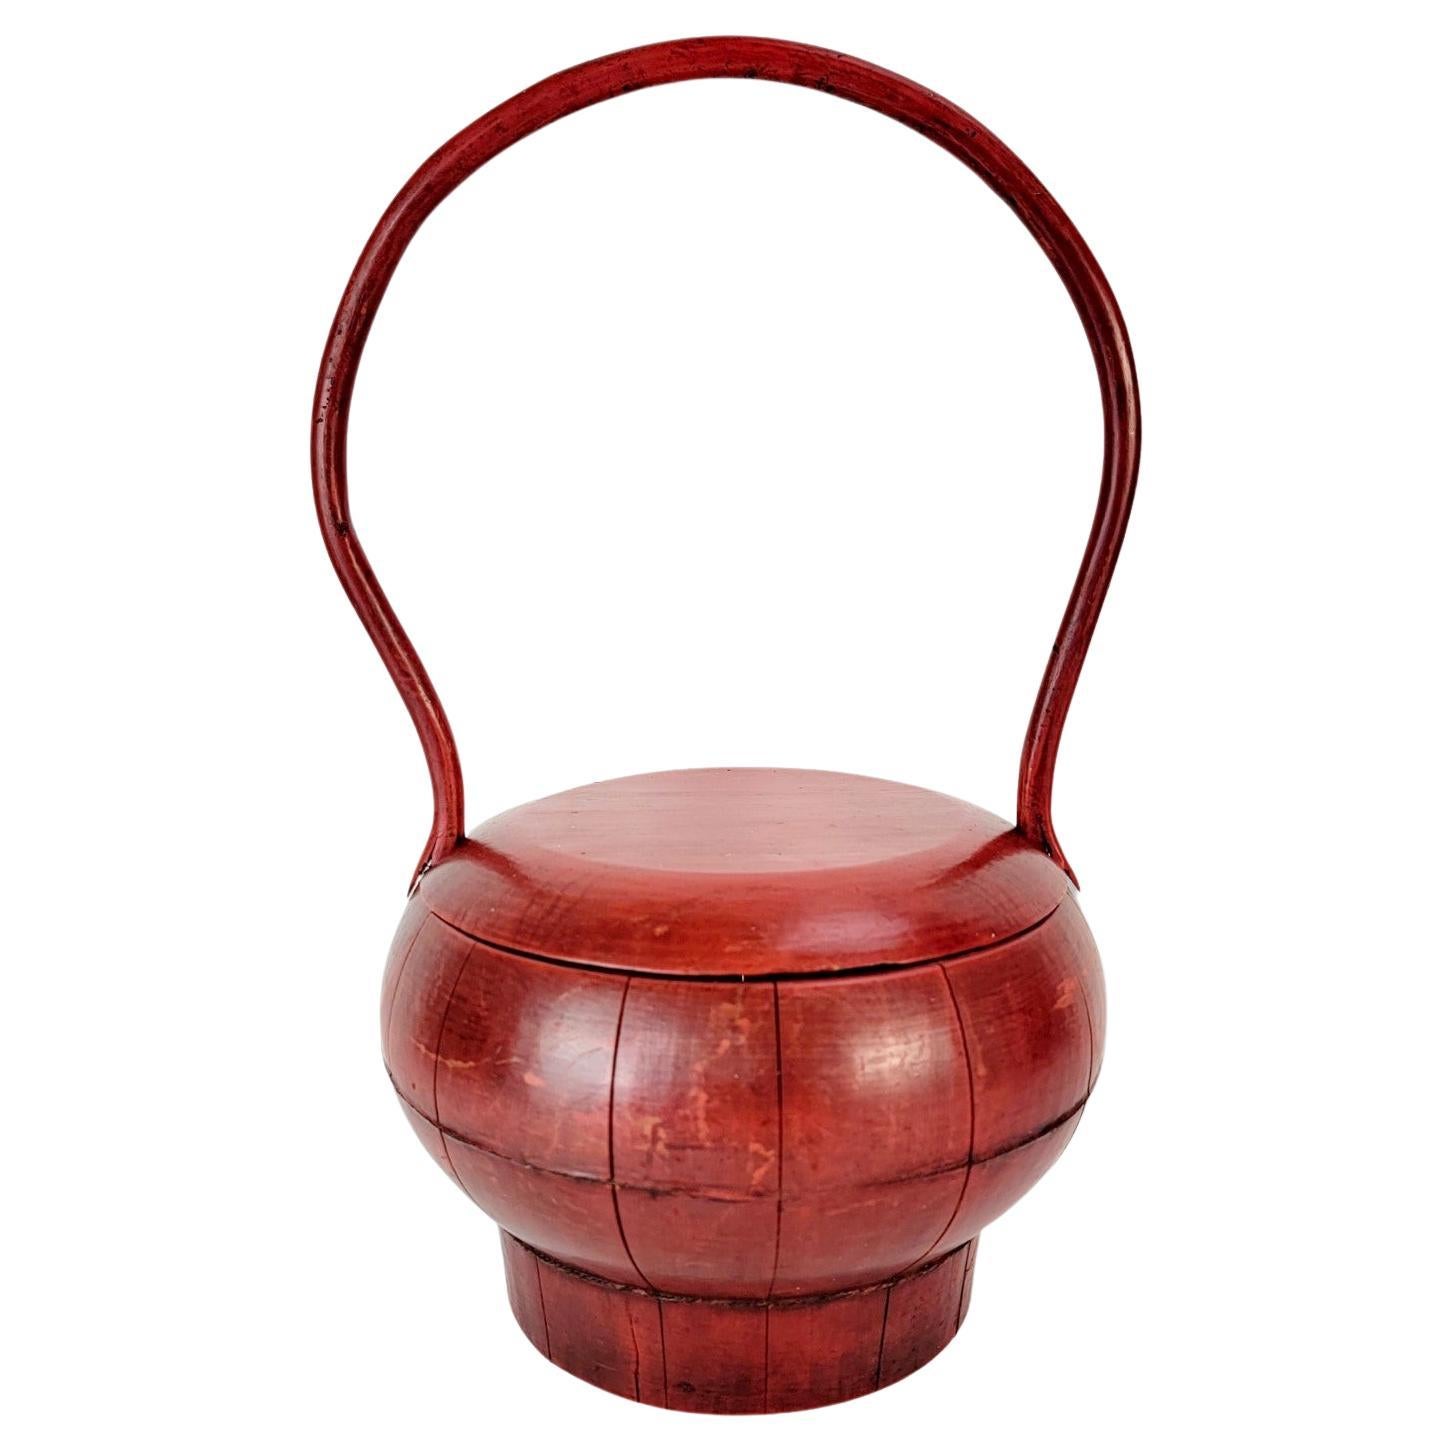 Antique Chinese Red Wedding Basket with Curved Handle